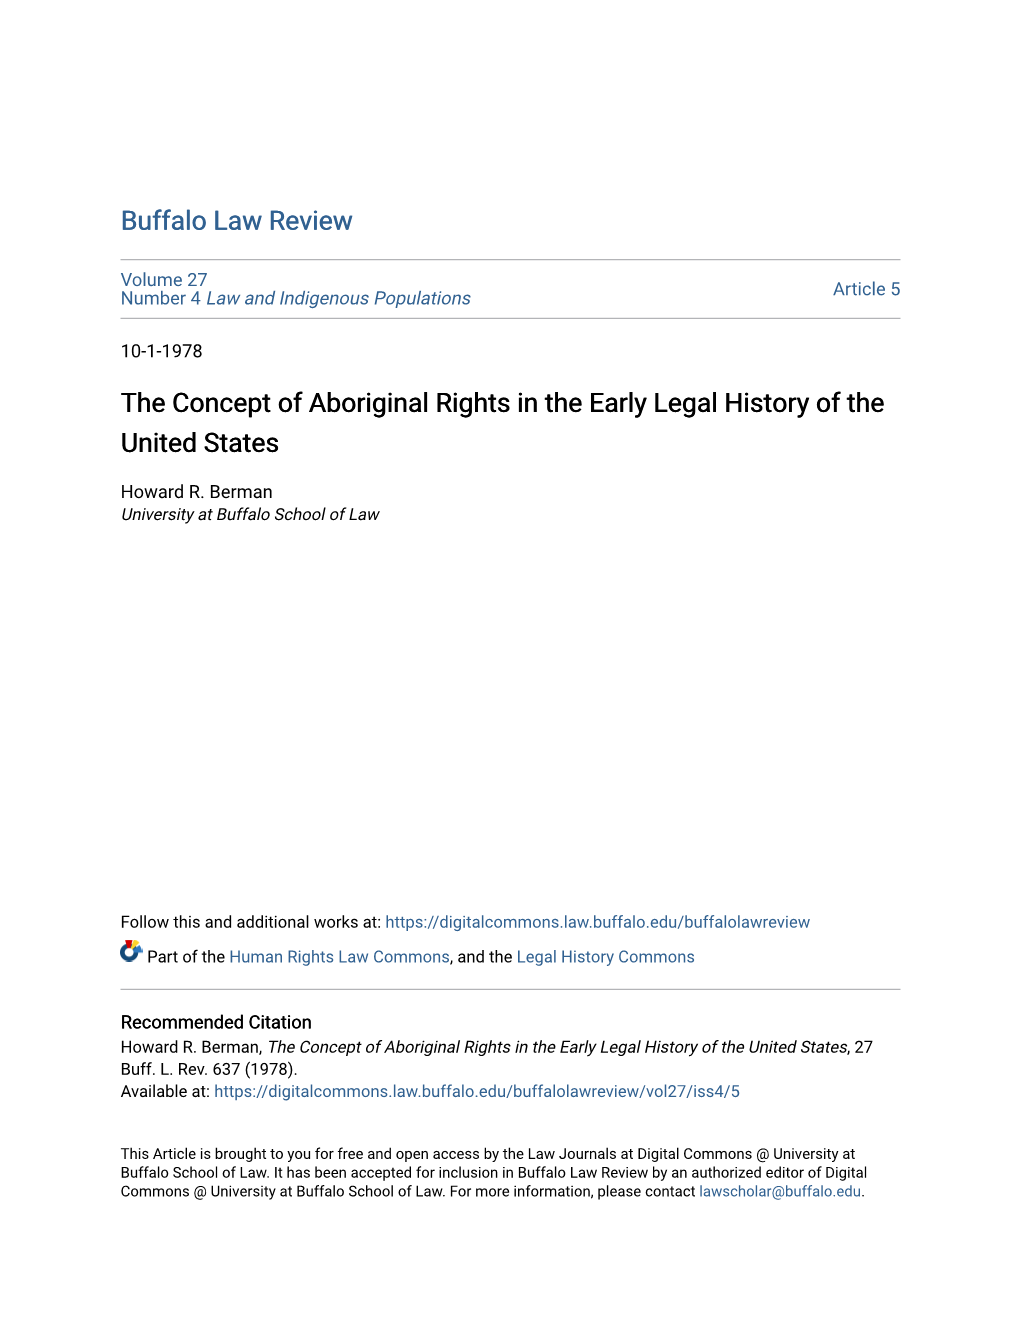 The Concept of Aboriginal Rights in the Early Legal History of the United States